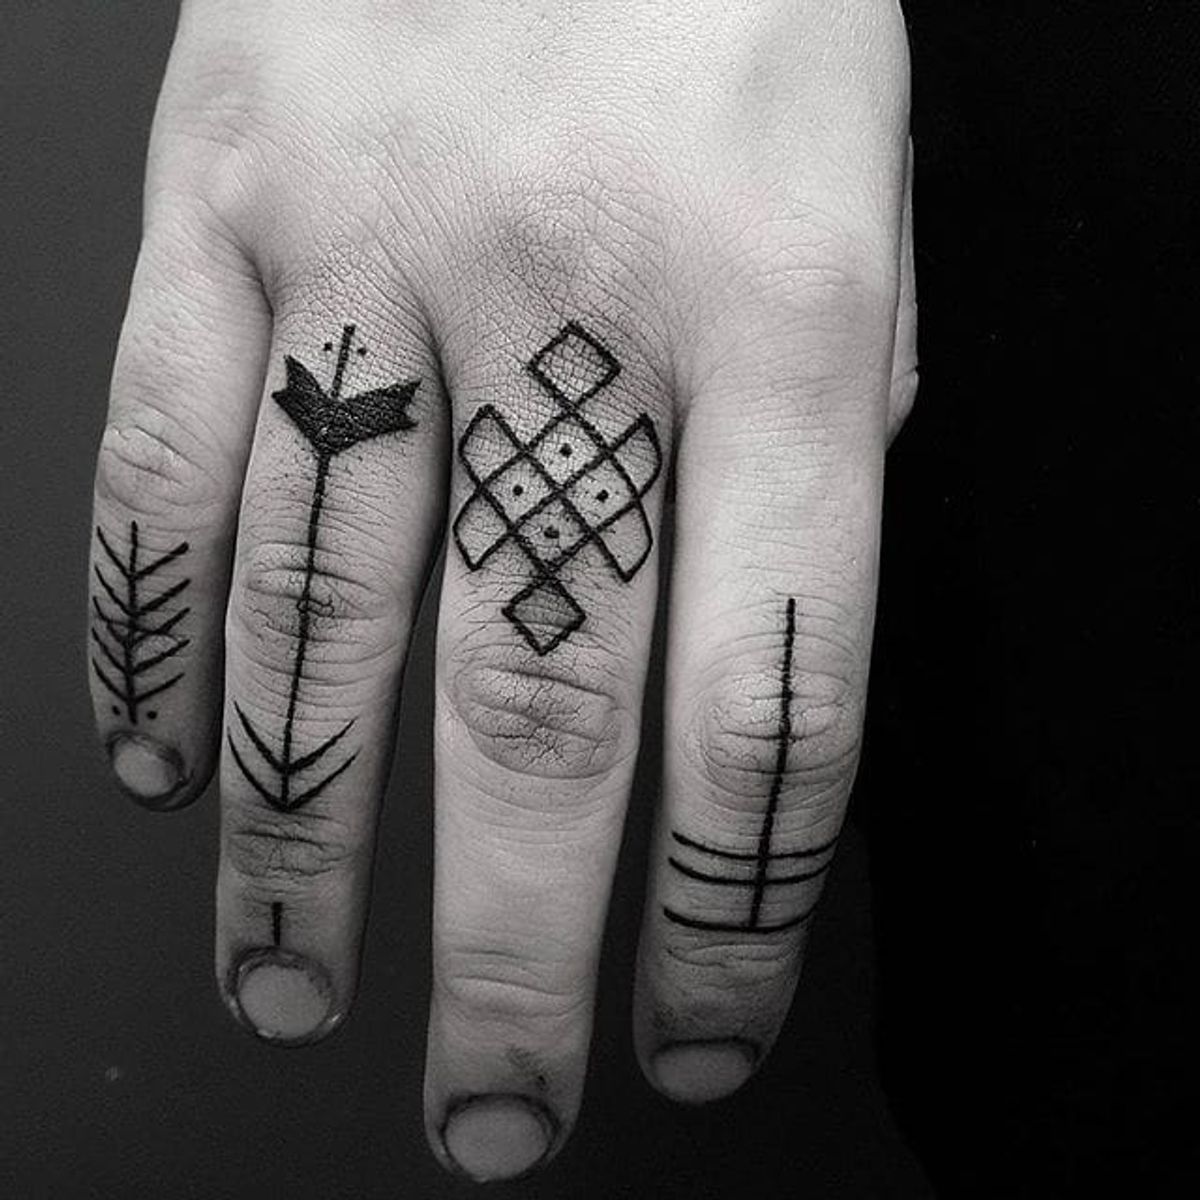 Tattoo uploaded by Stacie Mayer • Freehand finger doodles by Fliquet ...